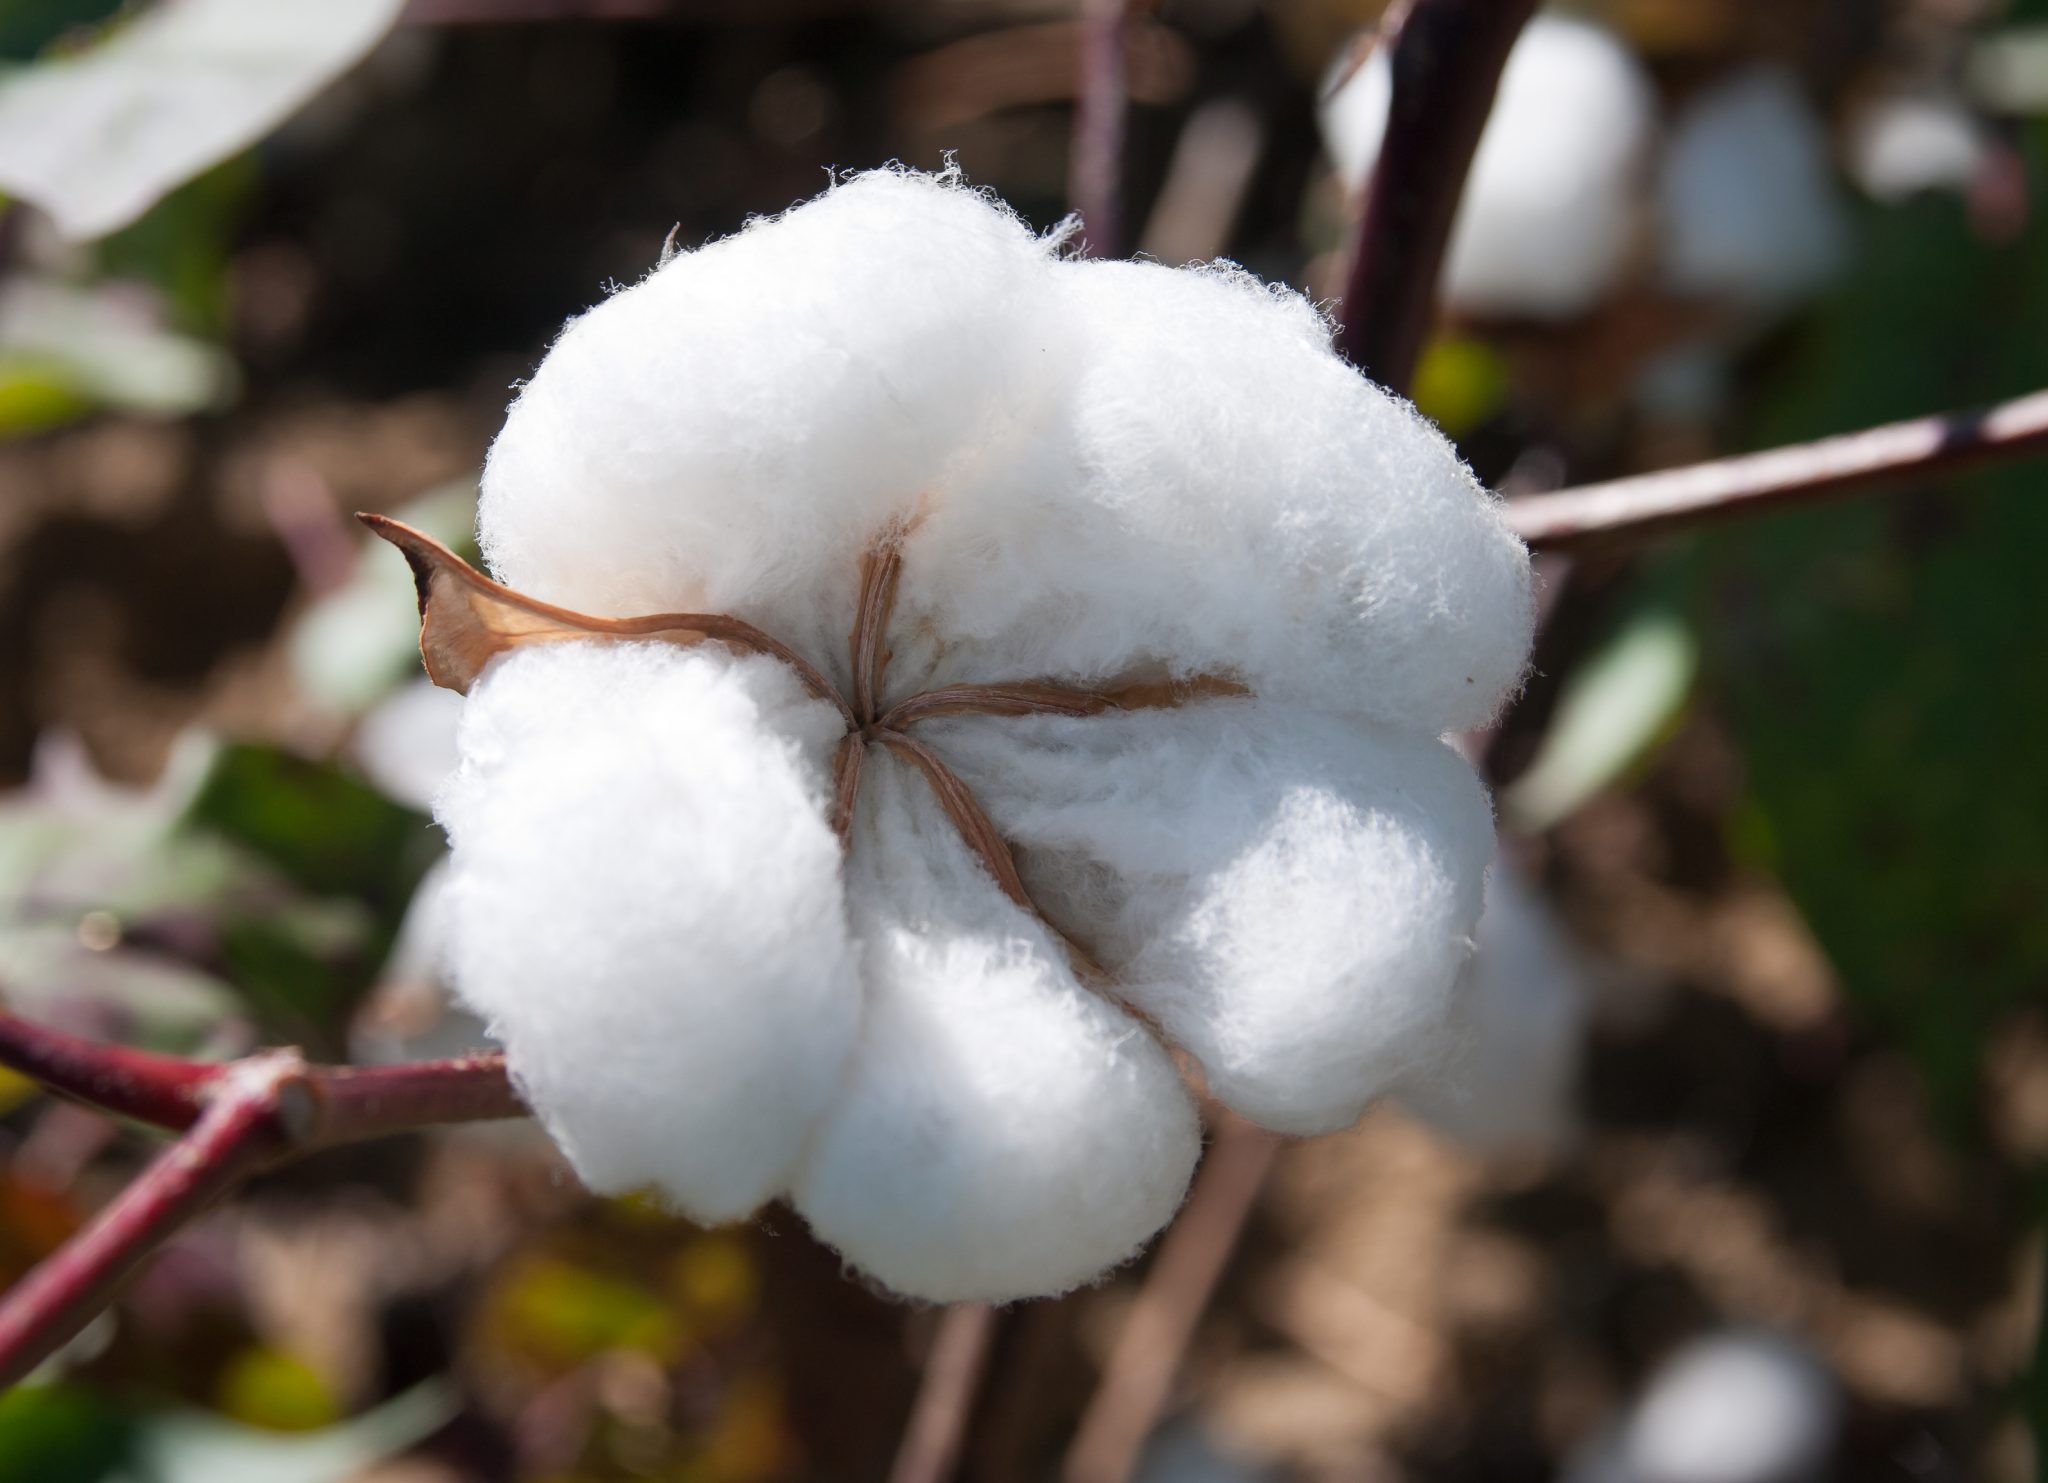 A close up of cotton that is ready to pick.